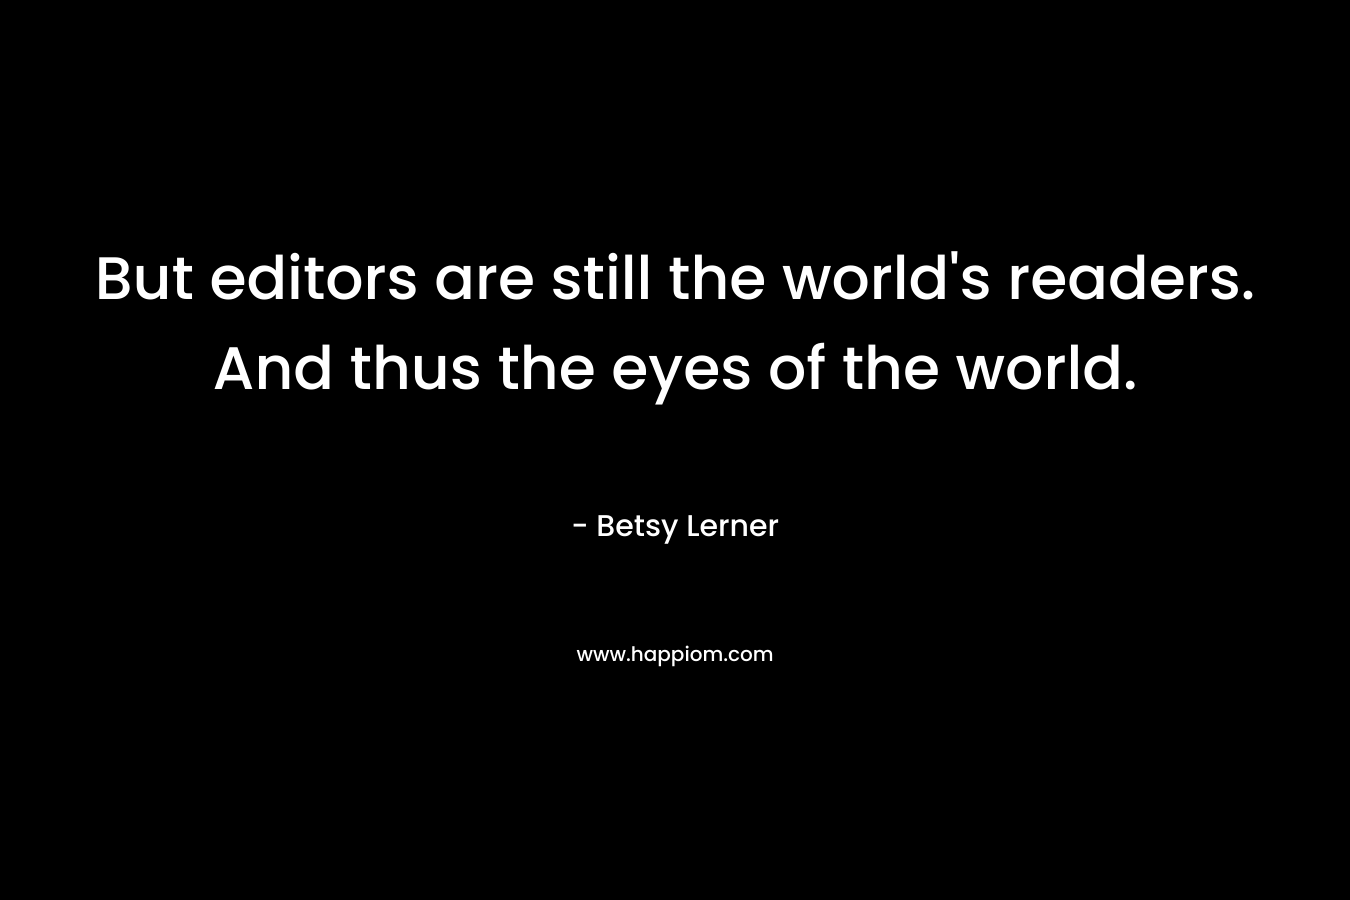 But editors are still the world's readers. And thus the eyes of the world.